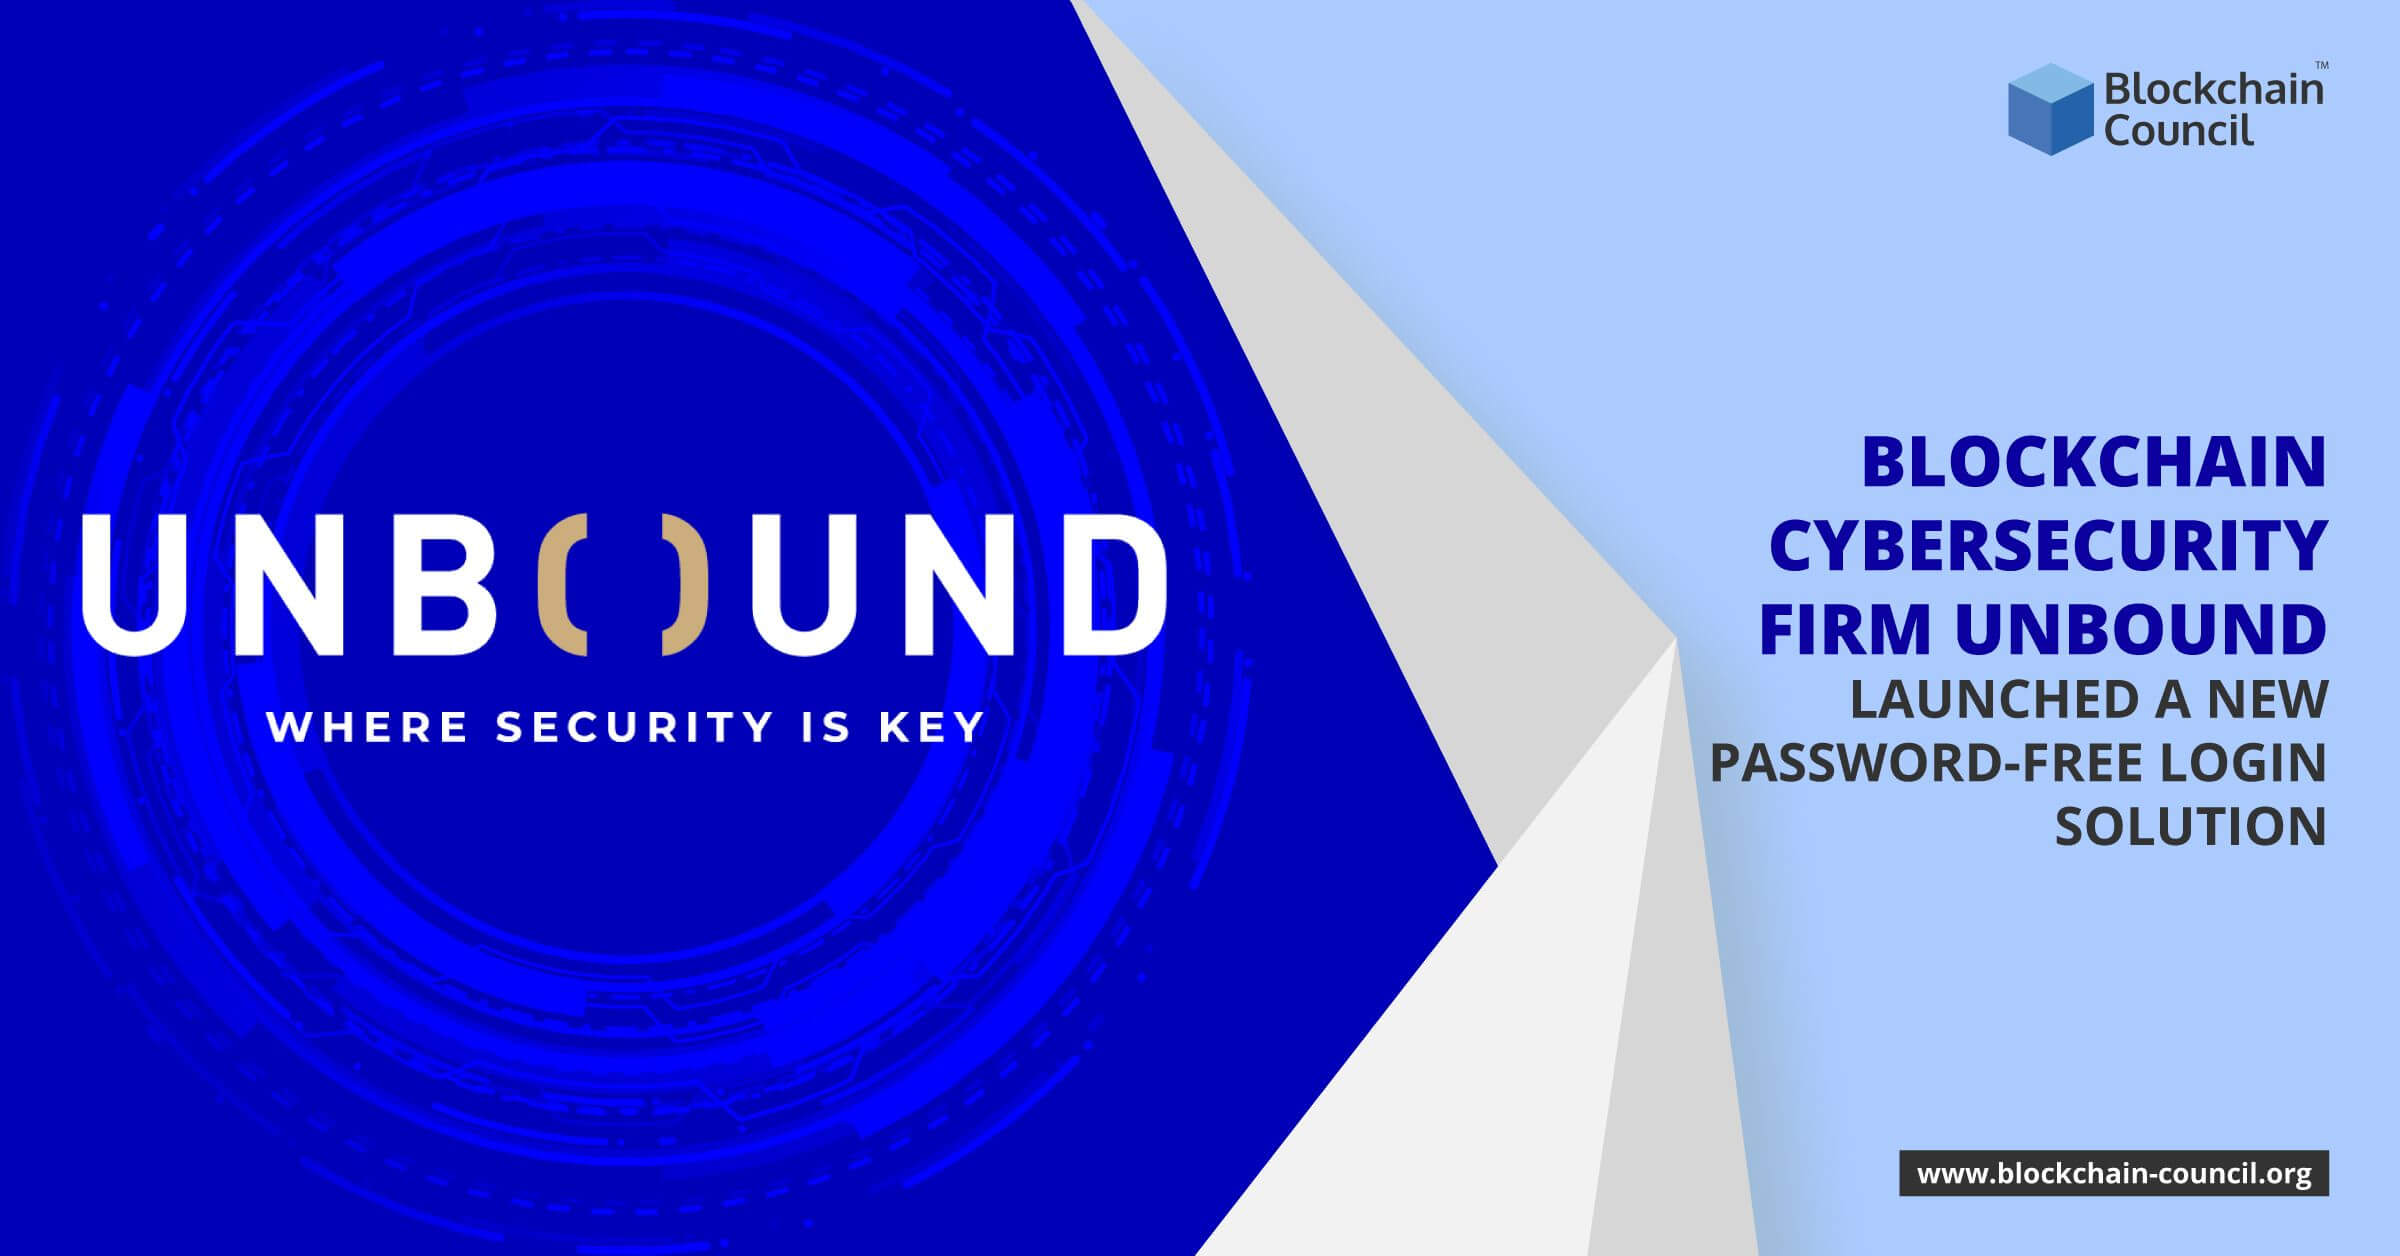 Blockchain Cybersecurity Firm Unbound Launched a New Password-Free Login Solution 